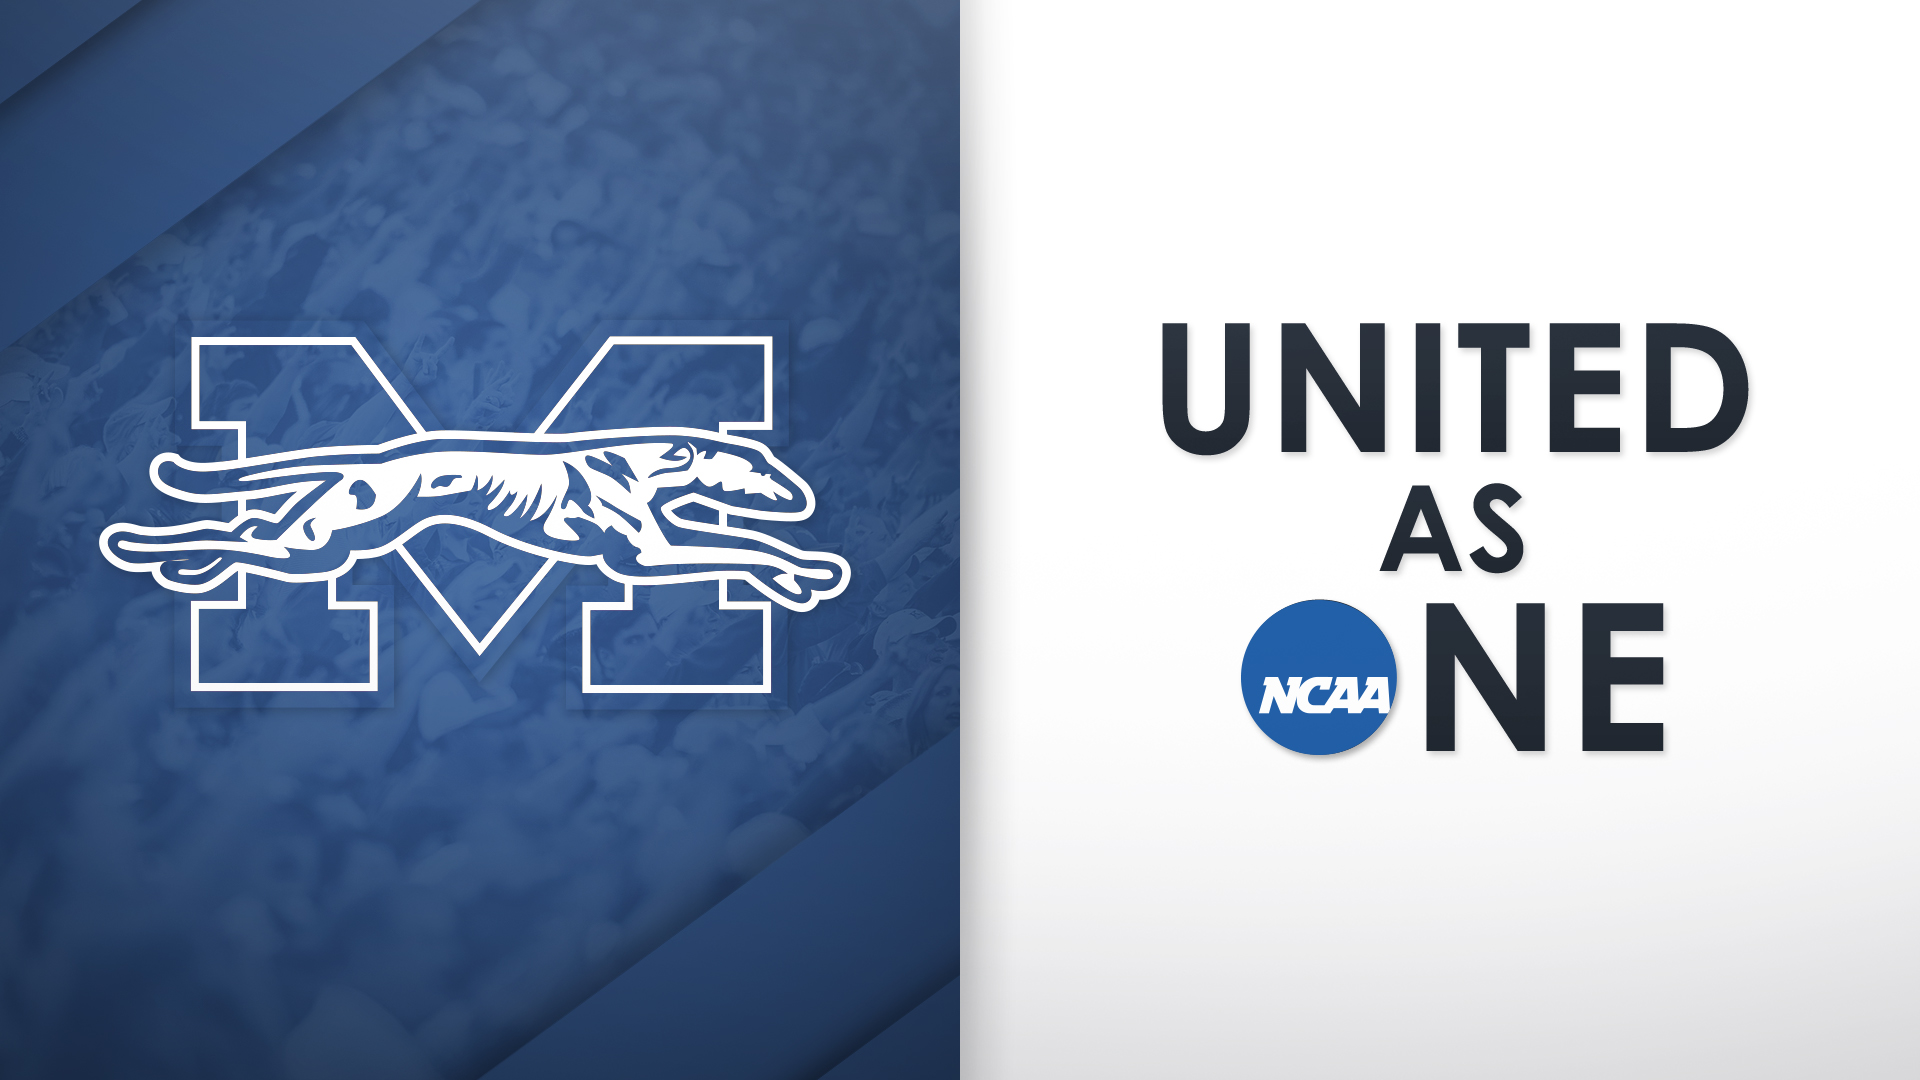 Greyhounds United as One with NCAA